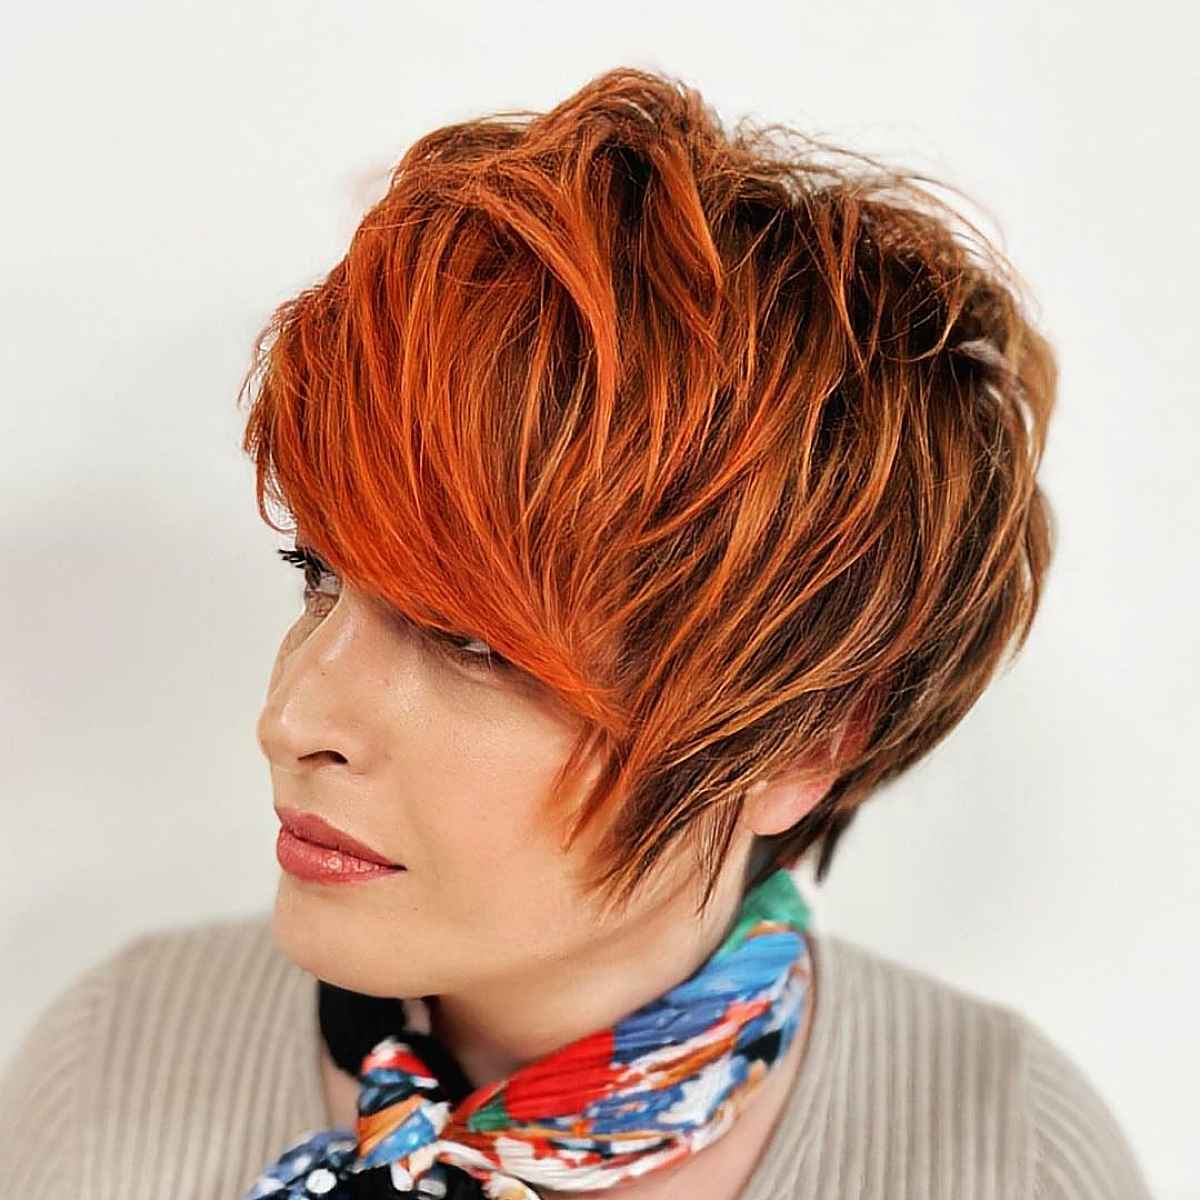 Layered Pixie Bob with Heavy Side Bangs